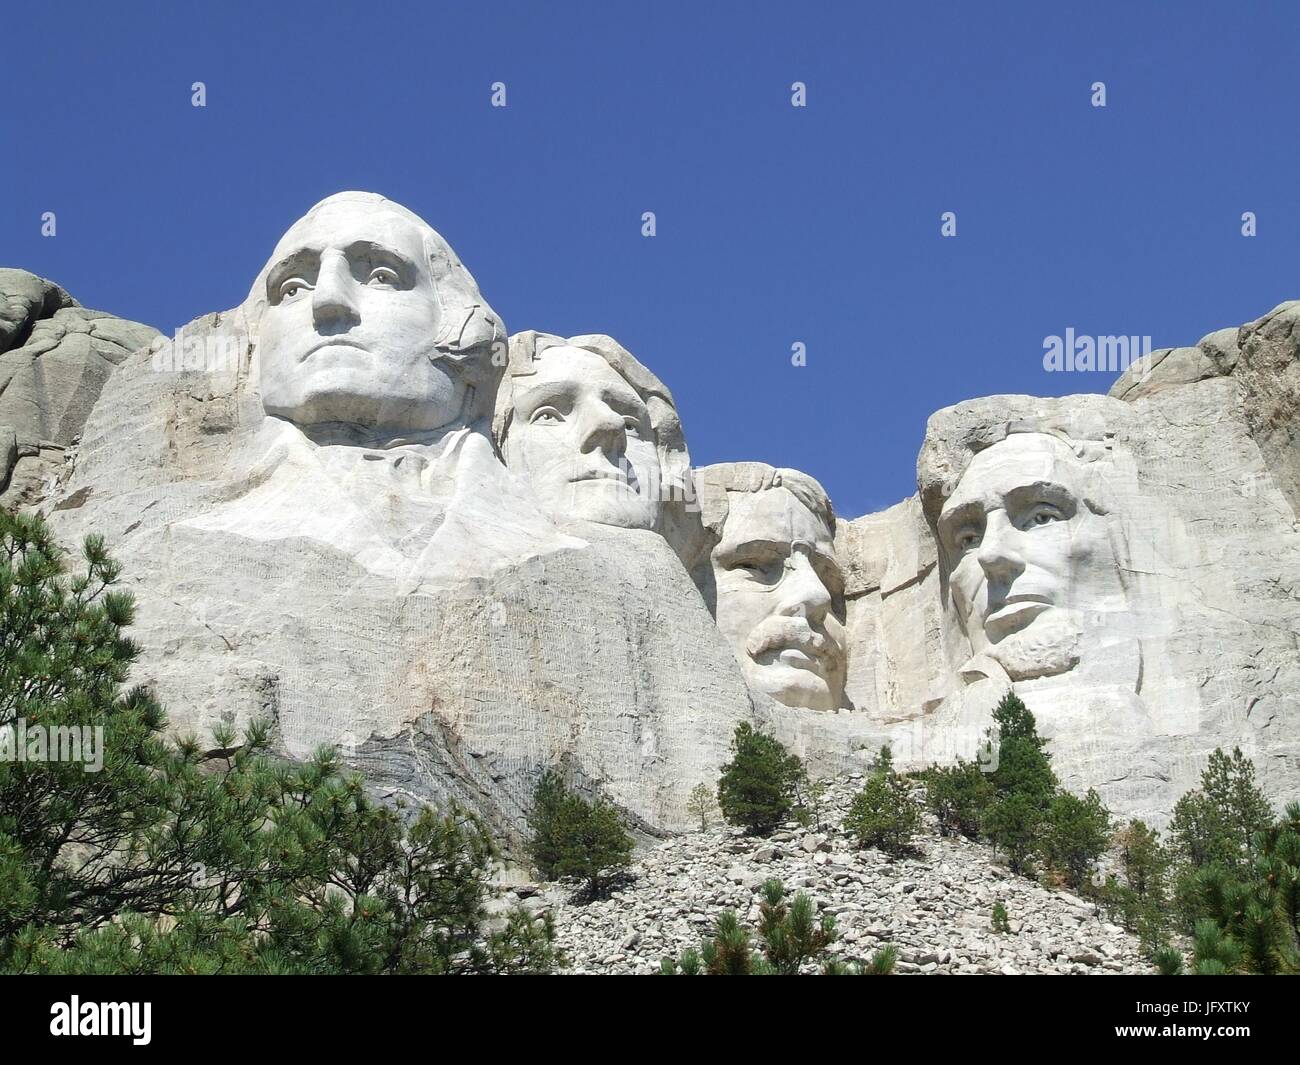 Full front view of the four former U.S. Presidents carved into the granite face of Mount Rushmore National Monument September 3, 2006 in Keystone, South Dakota.    (photo by NPS Photo via Planetpix) Stock Photo